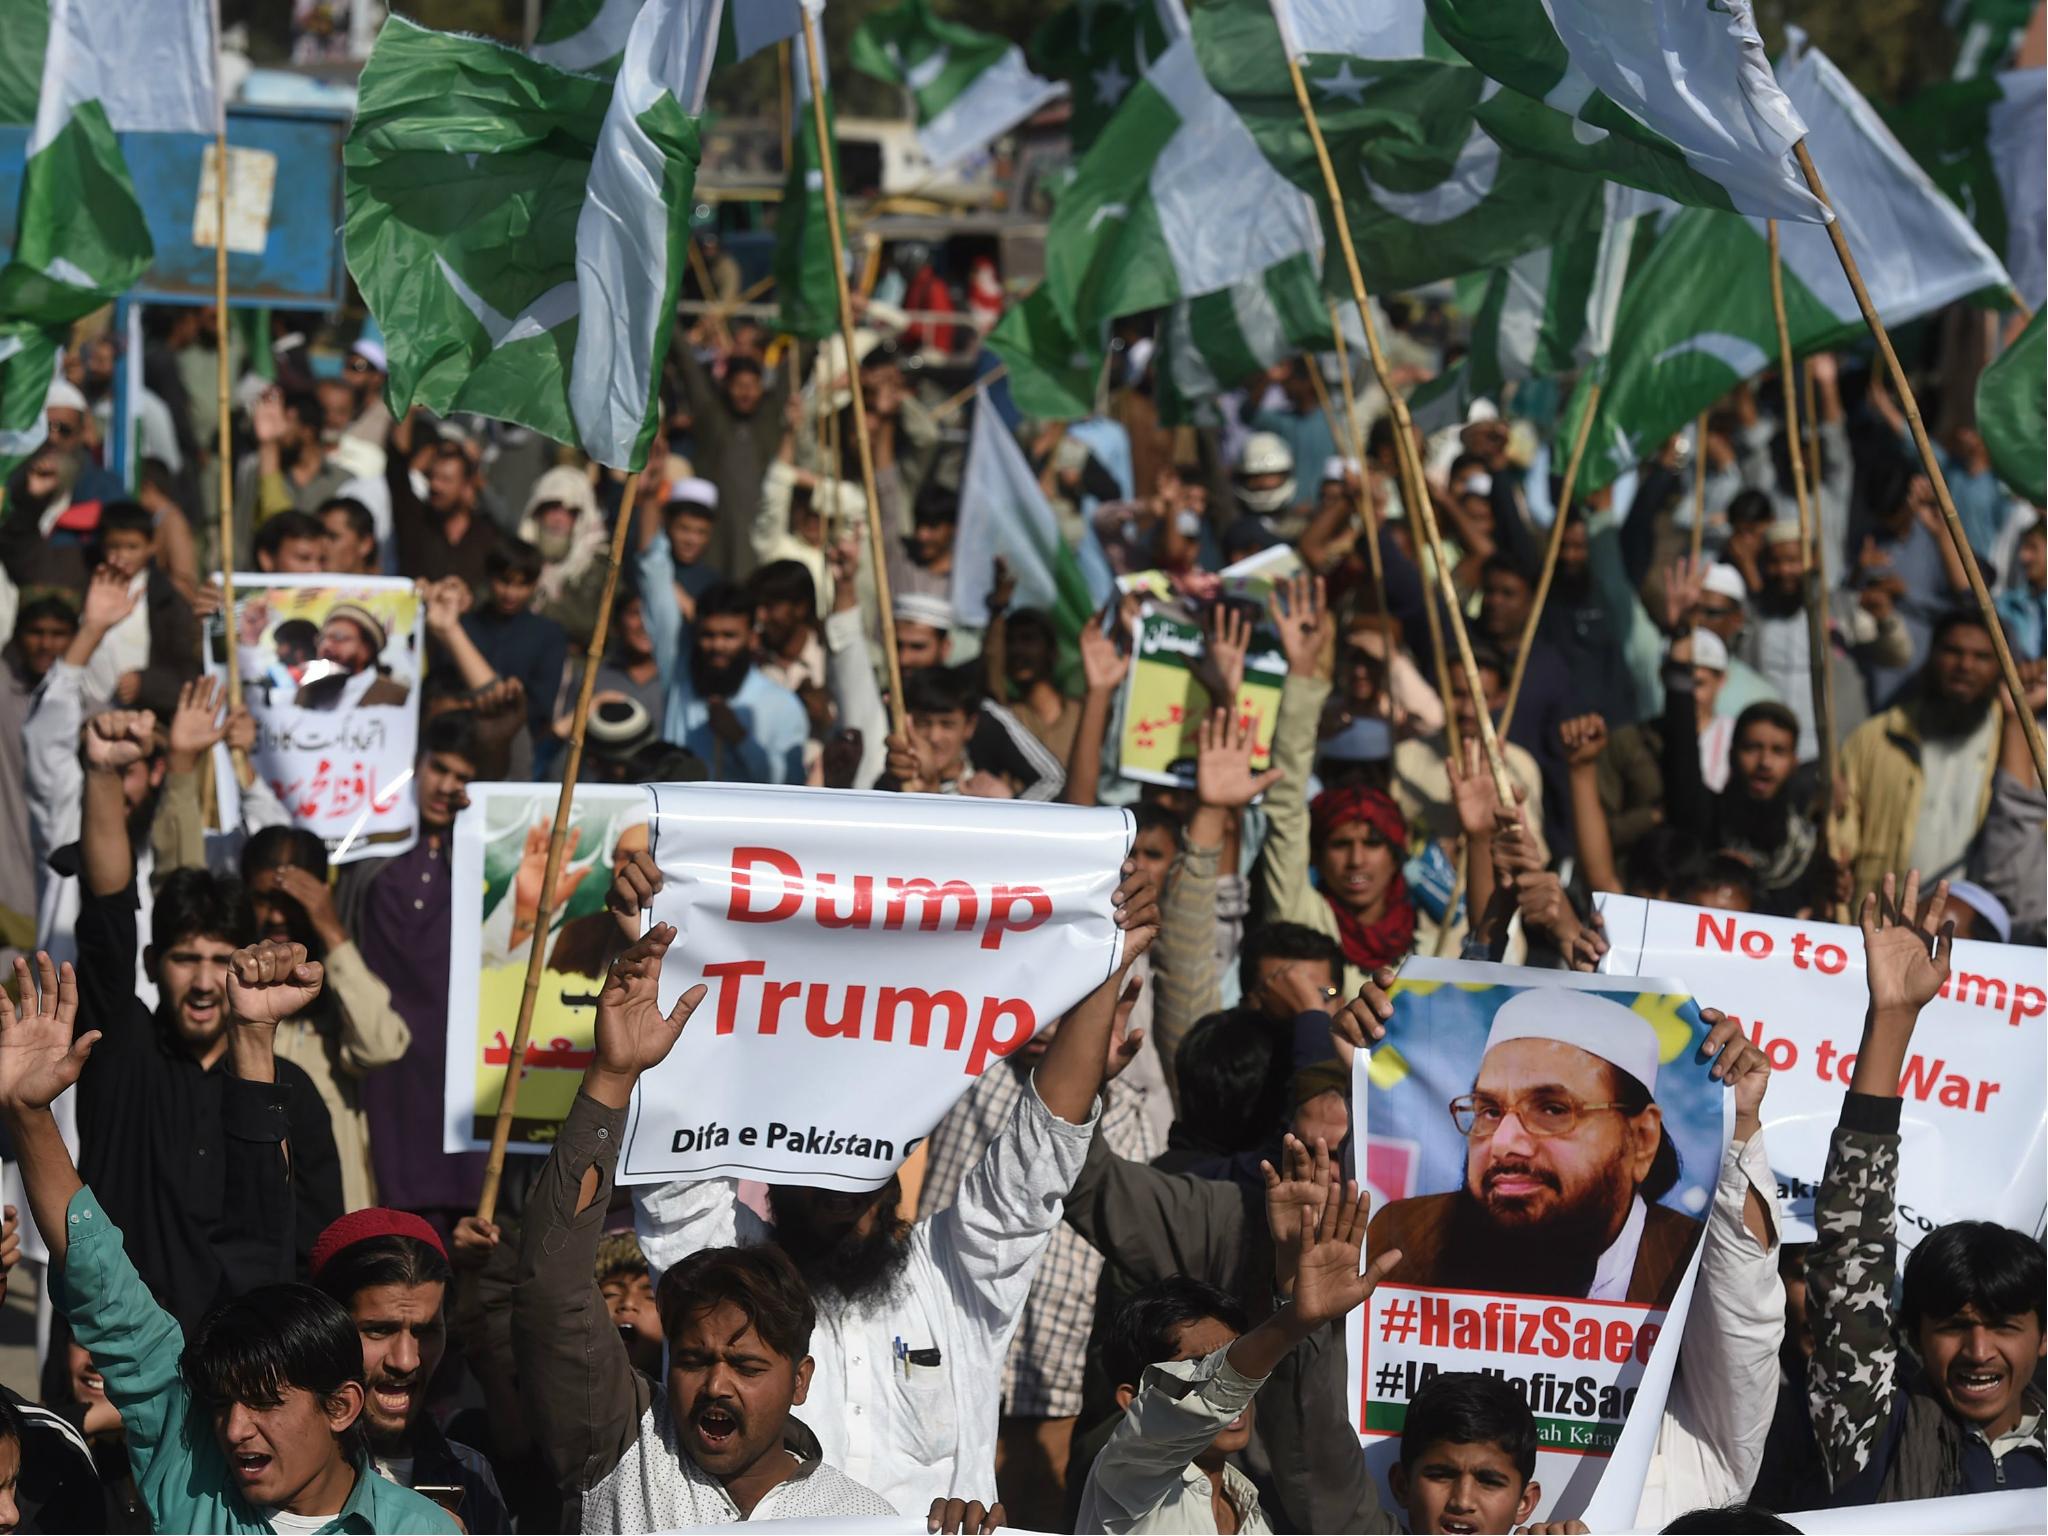 Activists of the Difa-e-Pakistan Council shout anti-US slogans at a protest in Karachi on 2 January 2018.